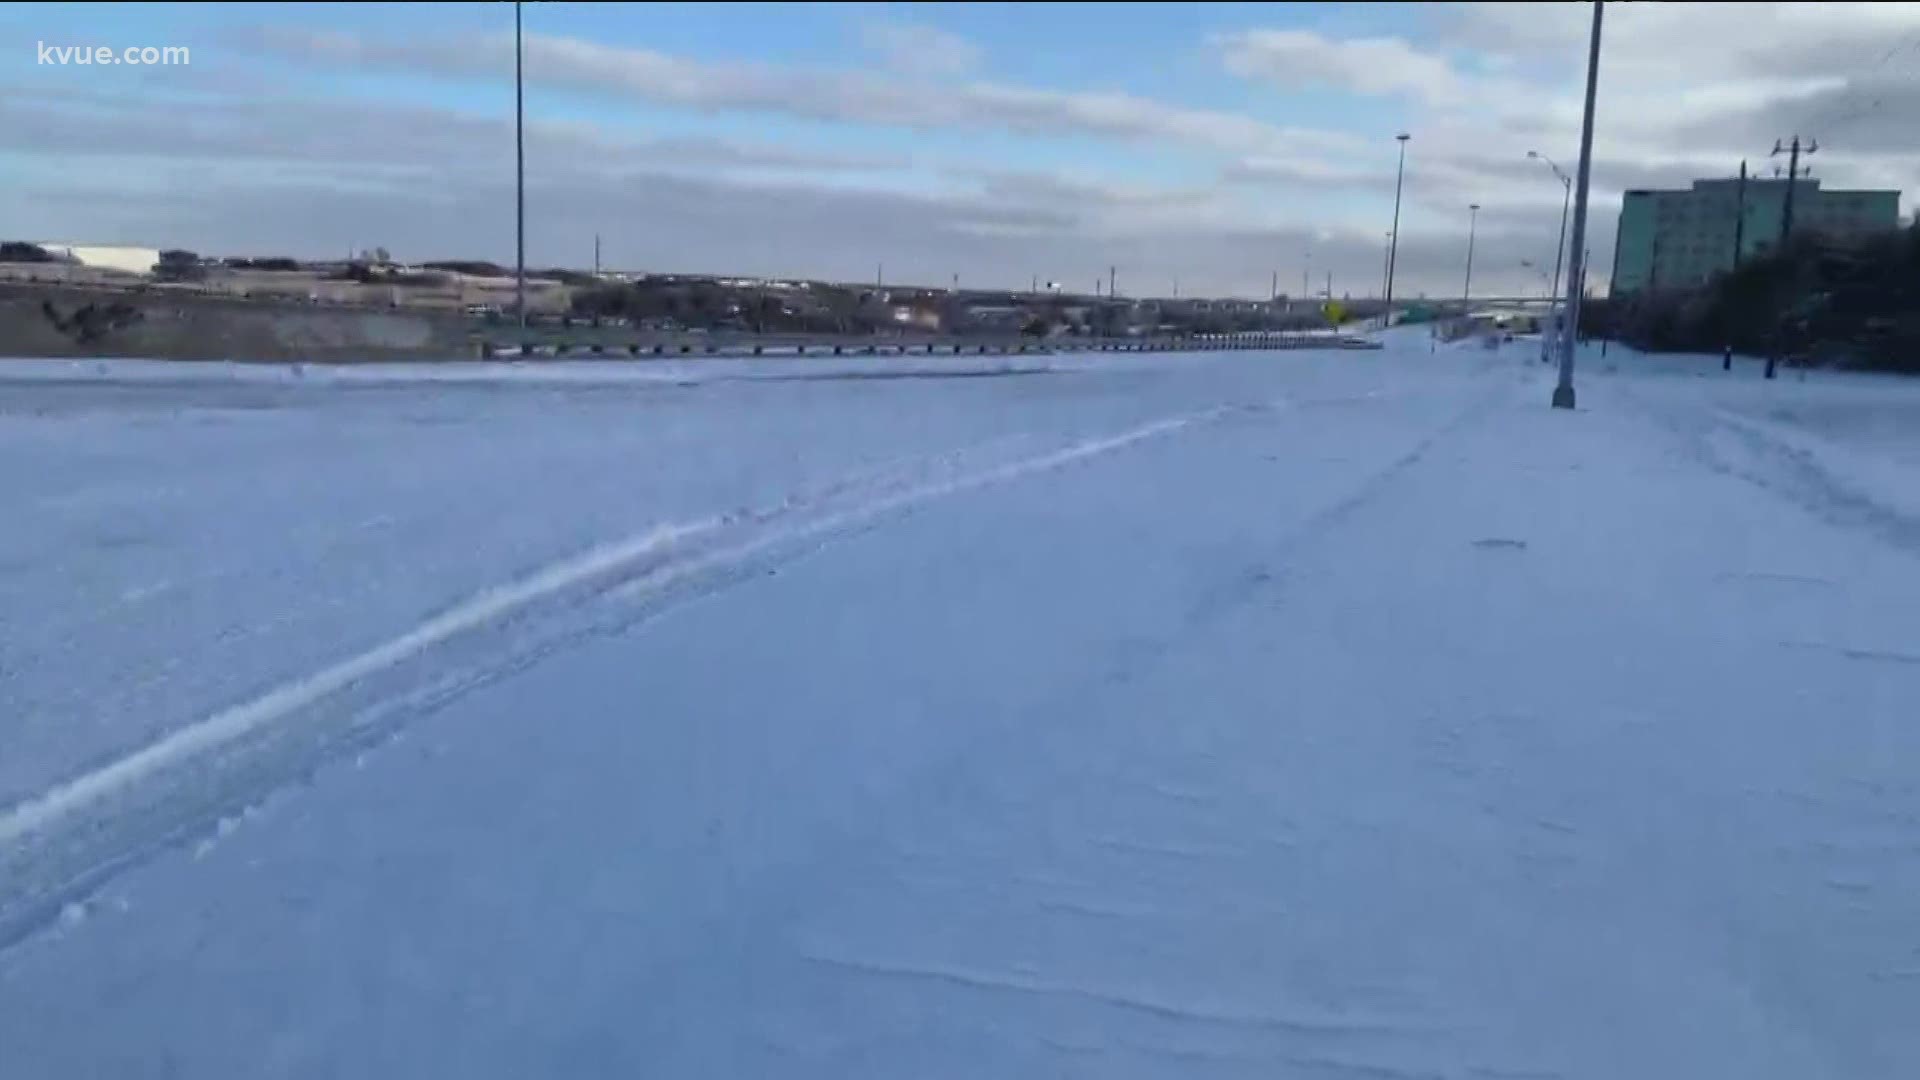 Austin roadways were much quieter on Monday as the area experienced heavy snowfall overnight.